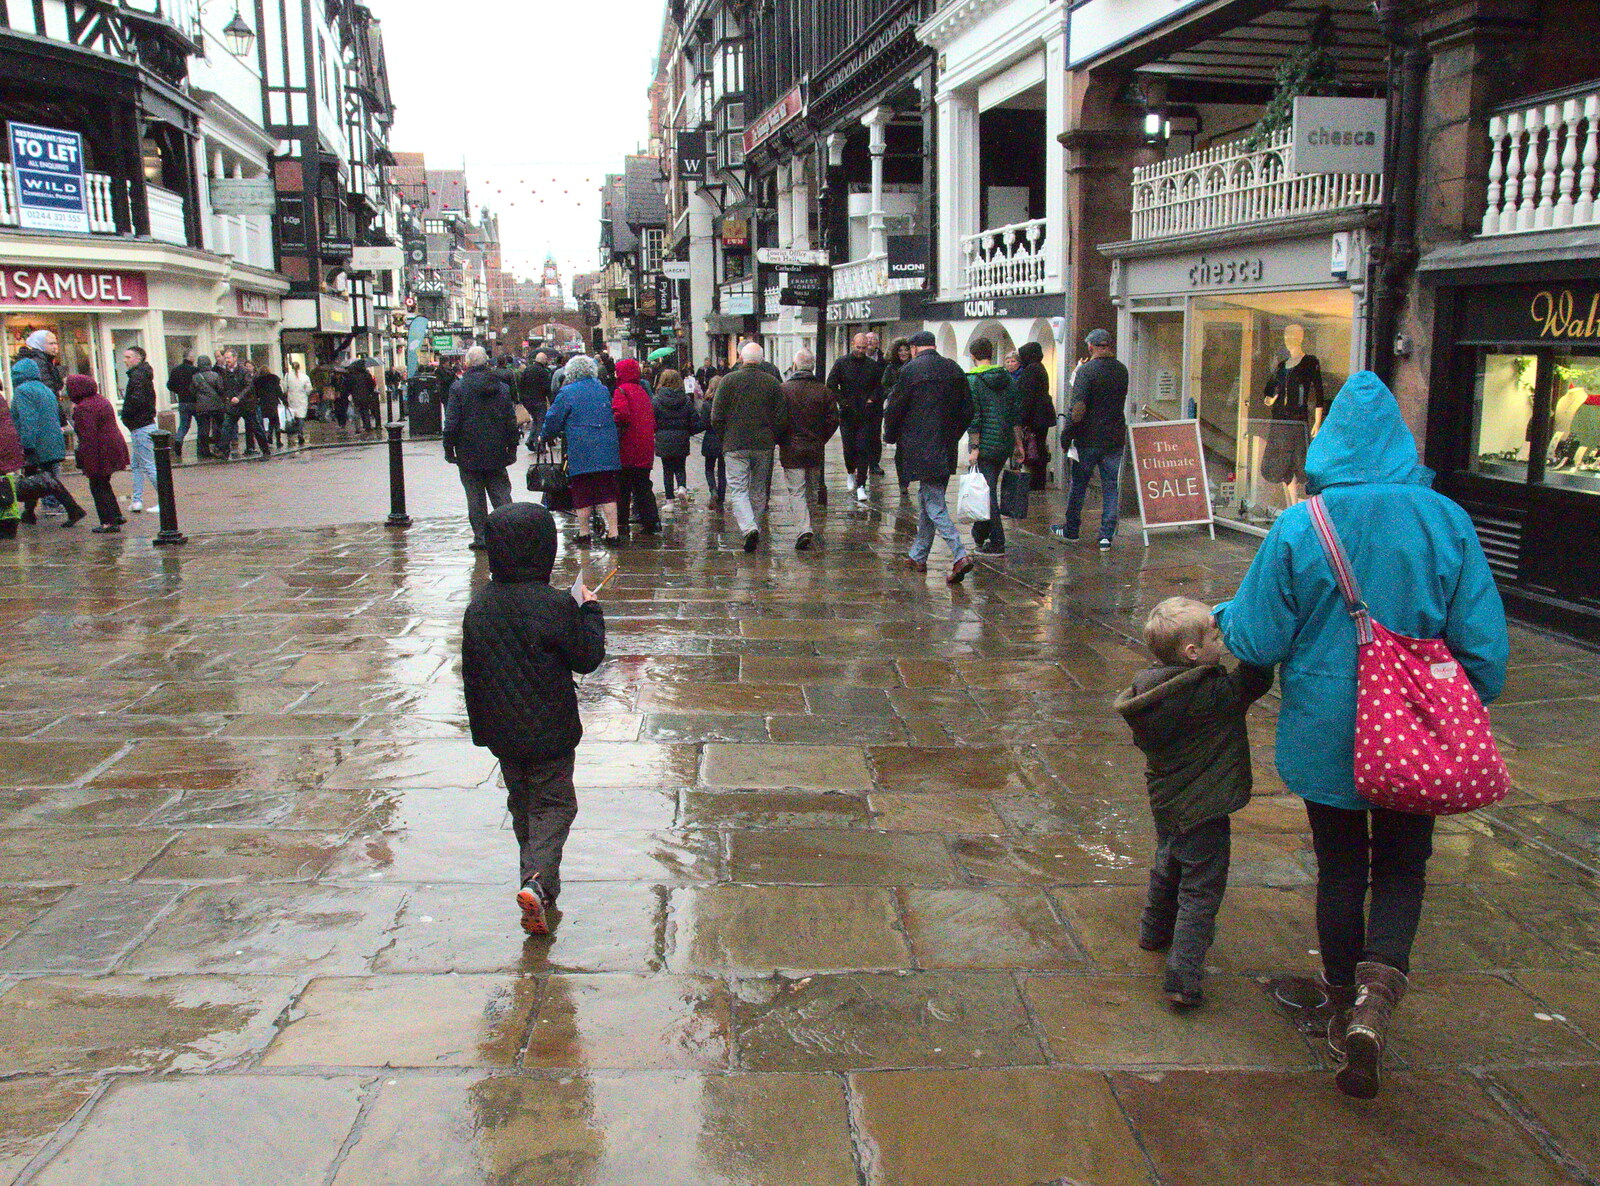 Walking on wet flagstones from A Party and a Road Trip to Chester, Suffolk and Cheshire - 20th December 2015